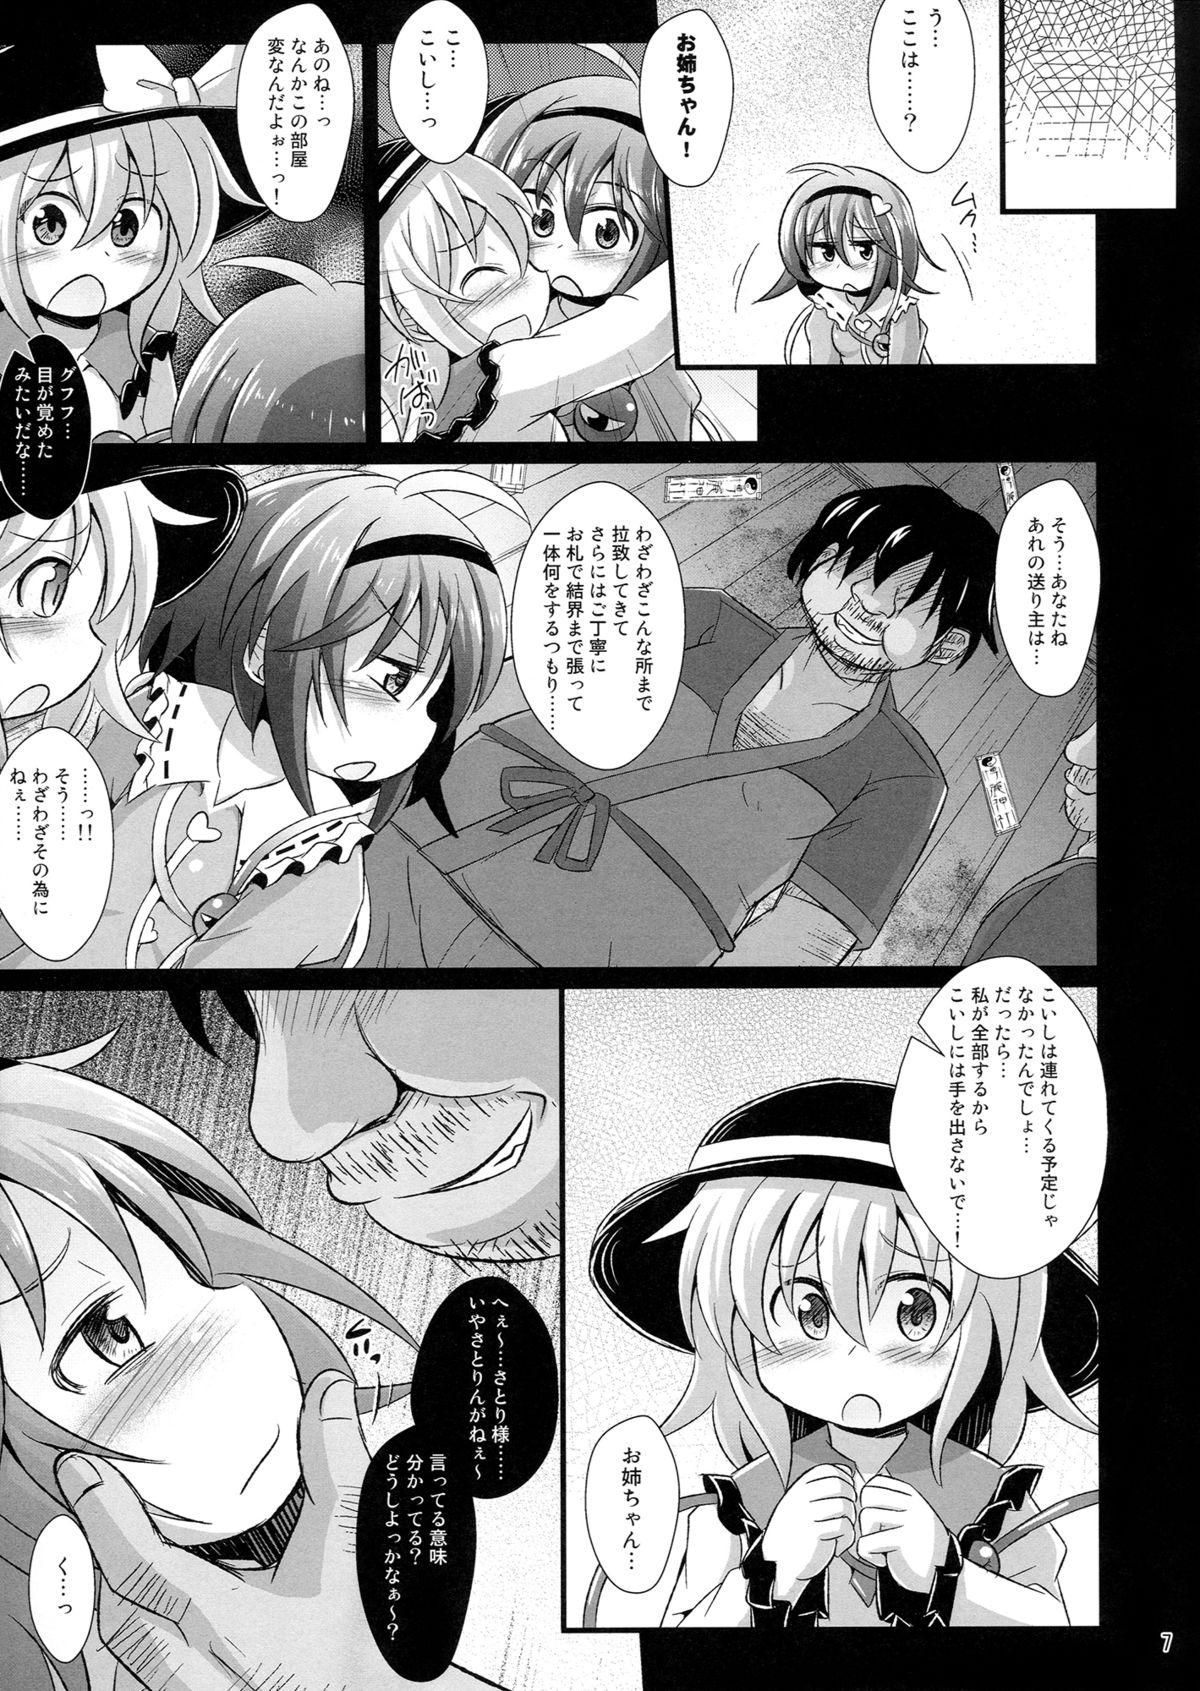 Shorts Immoral Desire - Touhou project Shoplifter - Page 6